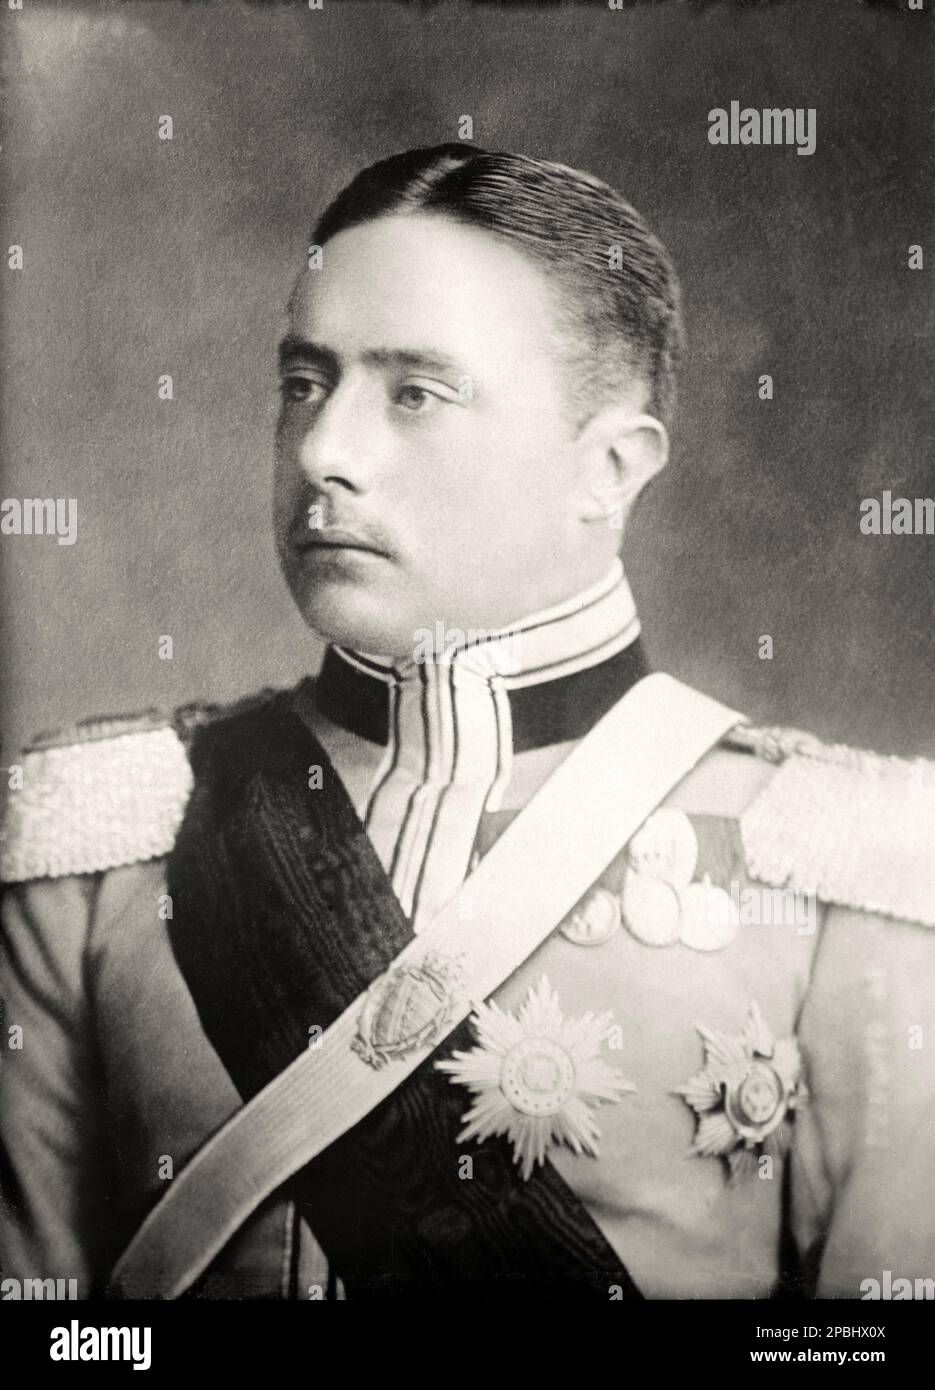 1901 ca  : The german Grand Duke WILHELM ERNST of SACHSEN  WEIMAR EISENACH  ( 1876 - 1923 ).  He was born in Weimar, the eldest son of Karl August of Saxe-Weimar-Eisenach ( 1844 - 1894 ), the Hereditary Grand Duke, and his wife Pauline of Saxe-Weimar-Eisenach ( a distant cousins ) . Wilhelm Ernst succeeded his grandfather Karl Alexander as Grand Duke on 5 January 1901 as his father had predeceased him. Wilhelm Ernst created the new Weimar state with the direction of Hans Olde, Henry van de Velde and Adolf Brütt. Also, he renewed the University of Jena by Theodor Fischer from Munich as well as Stock Photo